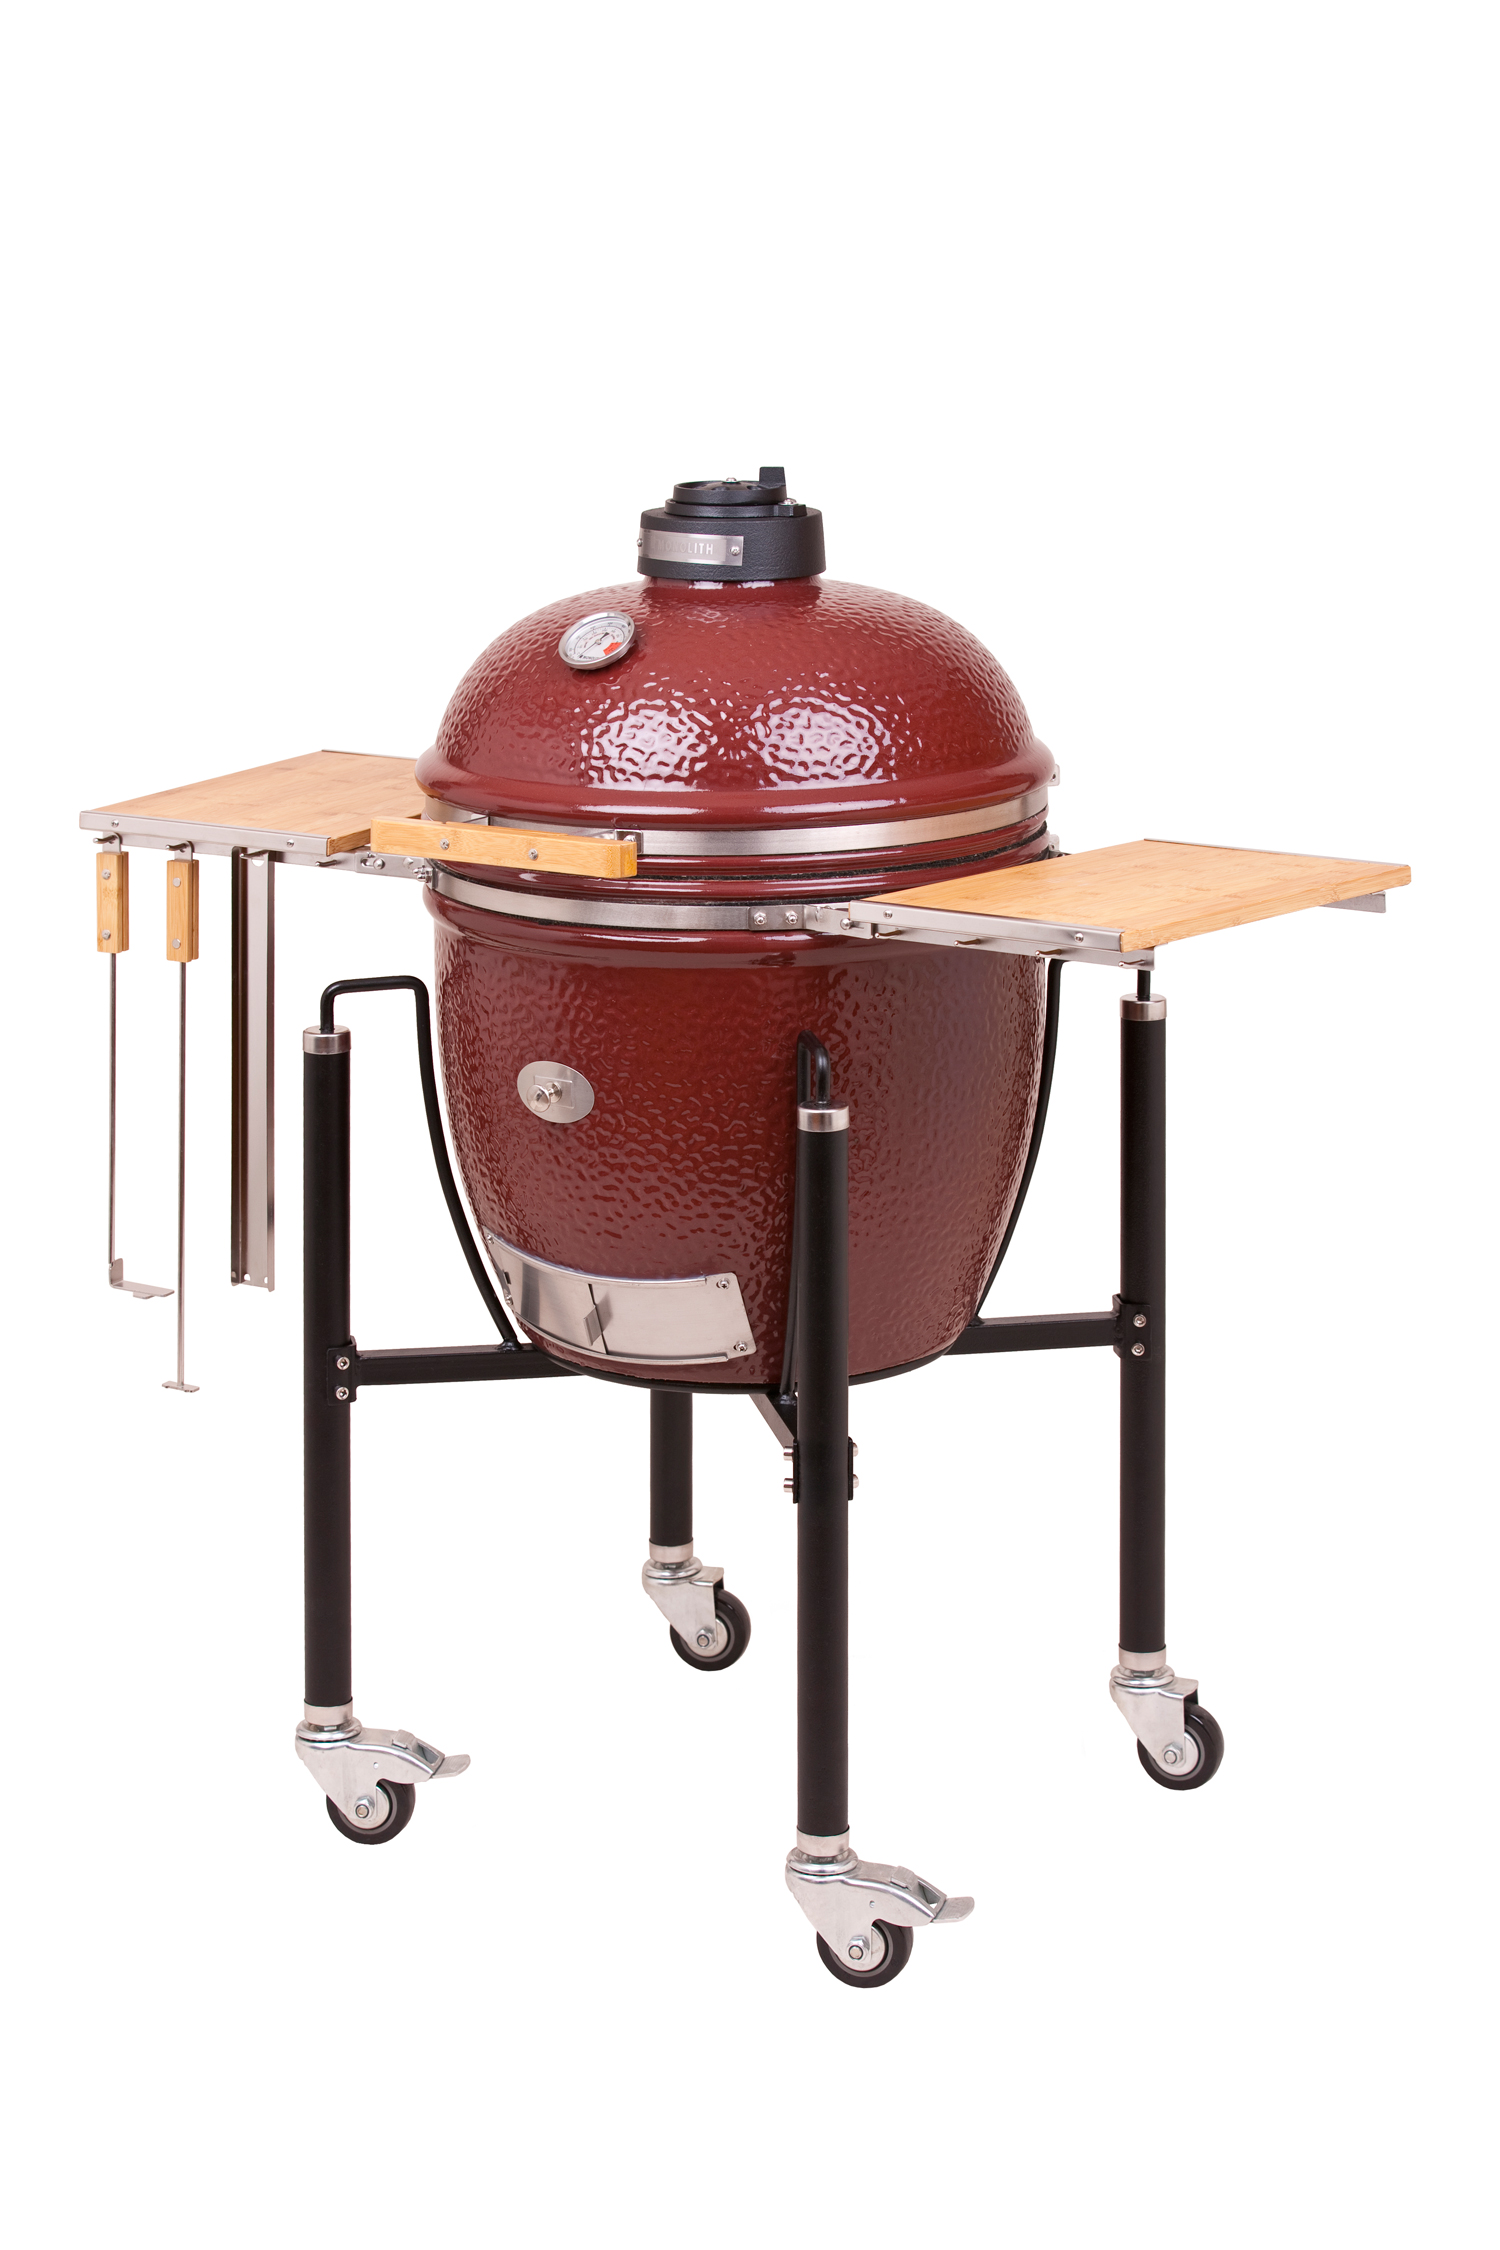 Monolith Classic 46cm Kamado Ceramic Barbecue Grill Red with Cart